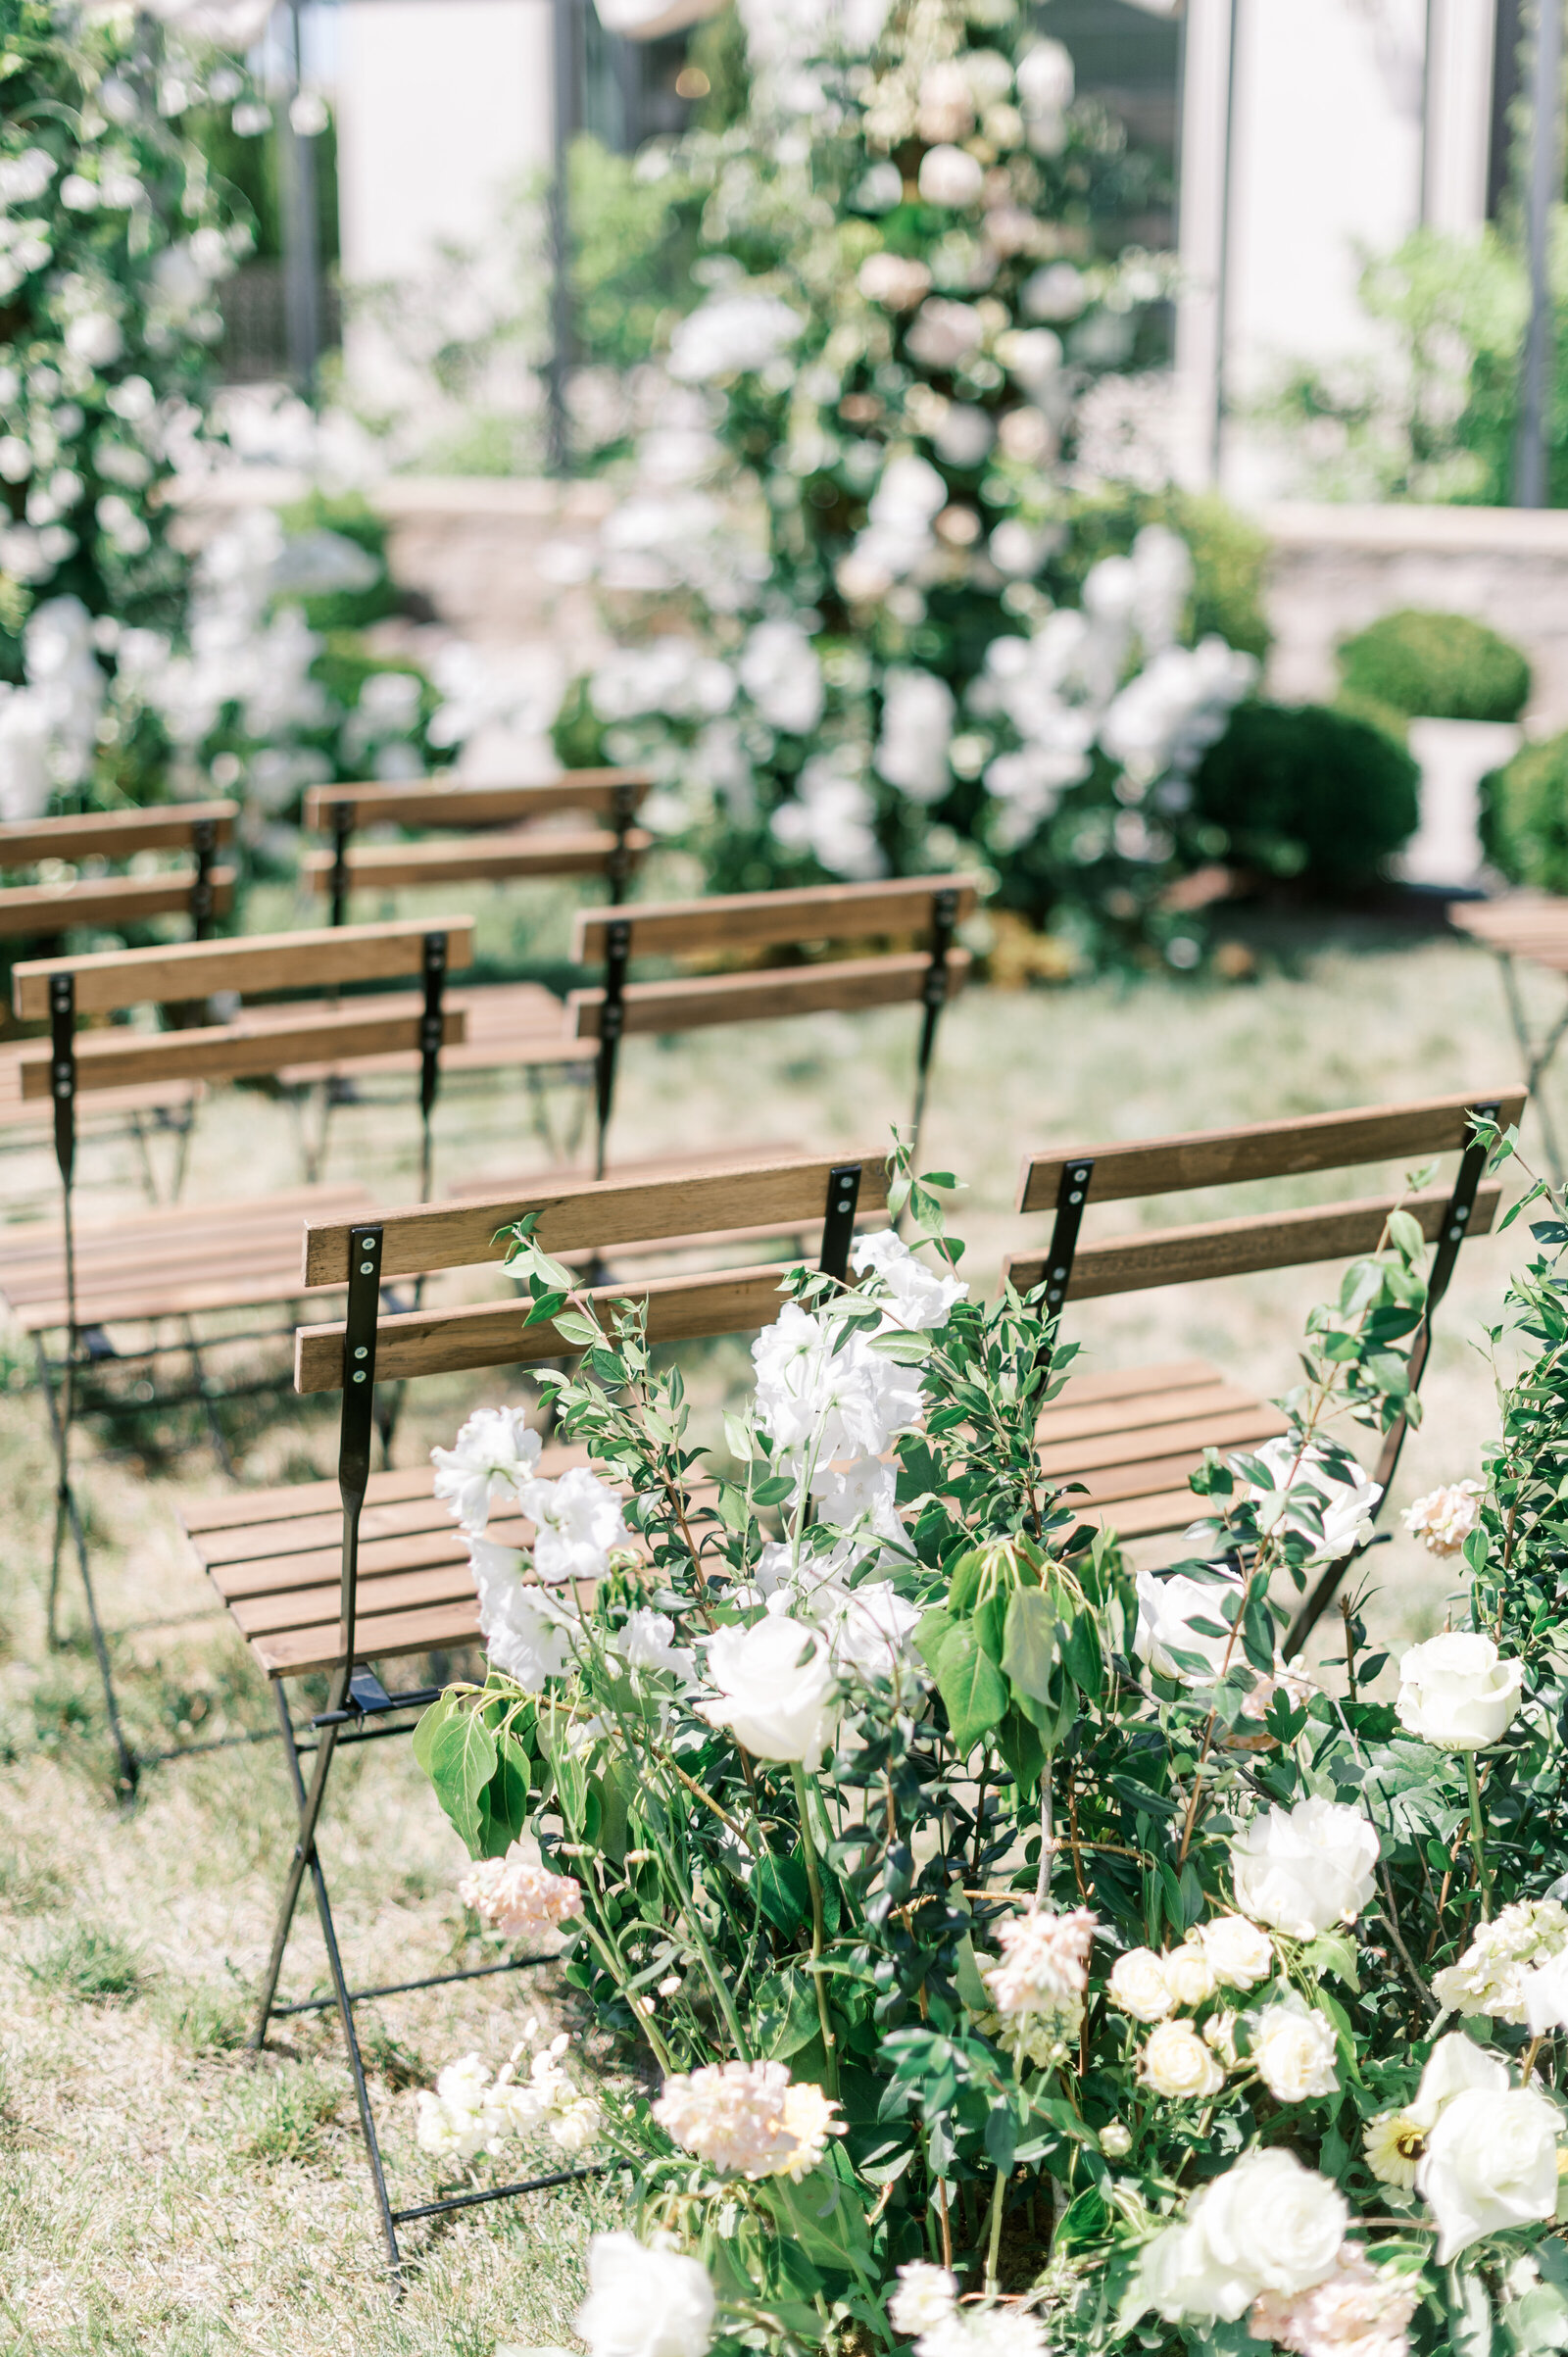 Chateau Des Fleurs Wedding ceremony setup with wooden chairs in Boise Idaho